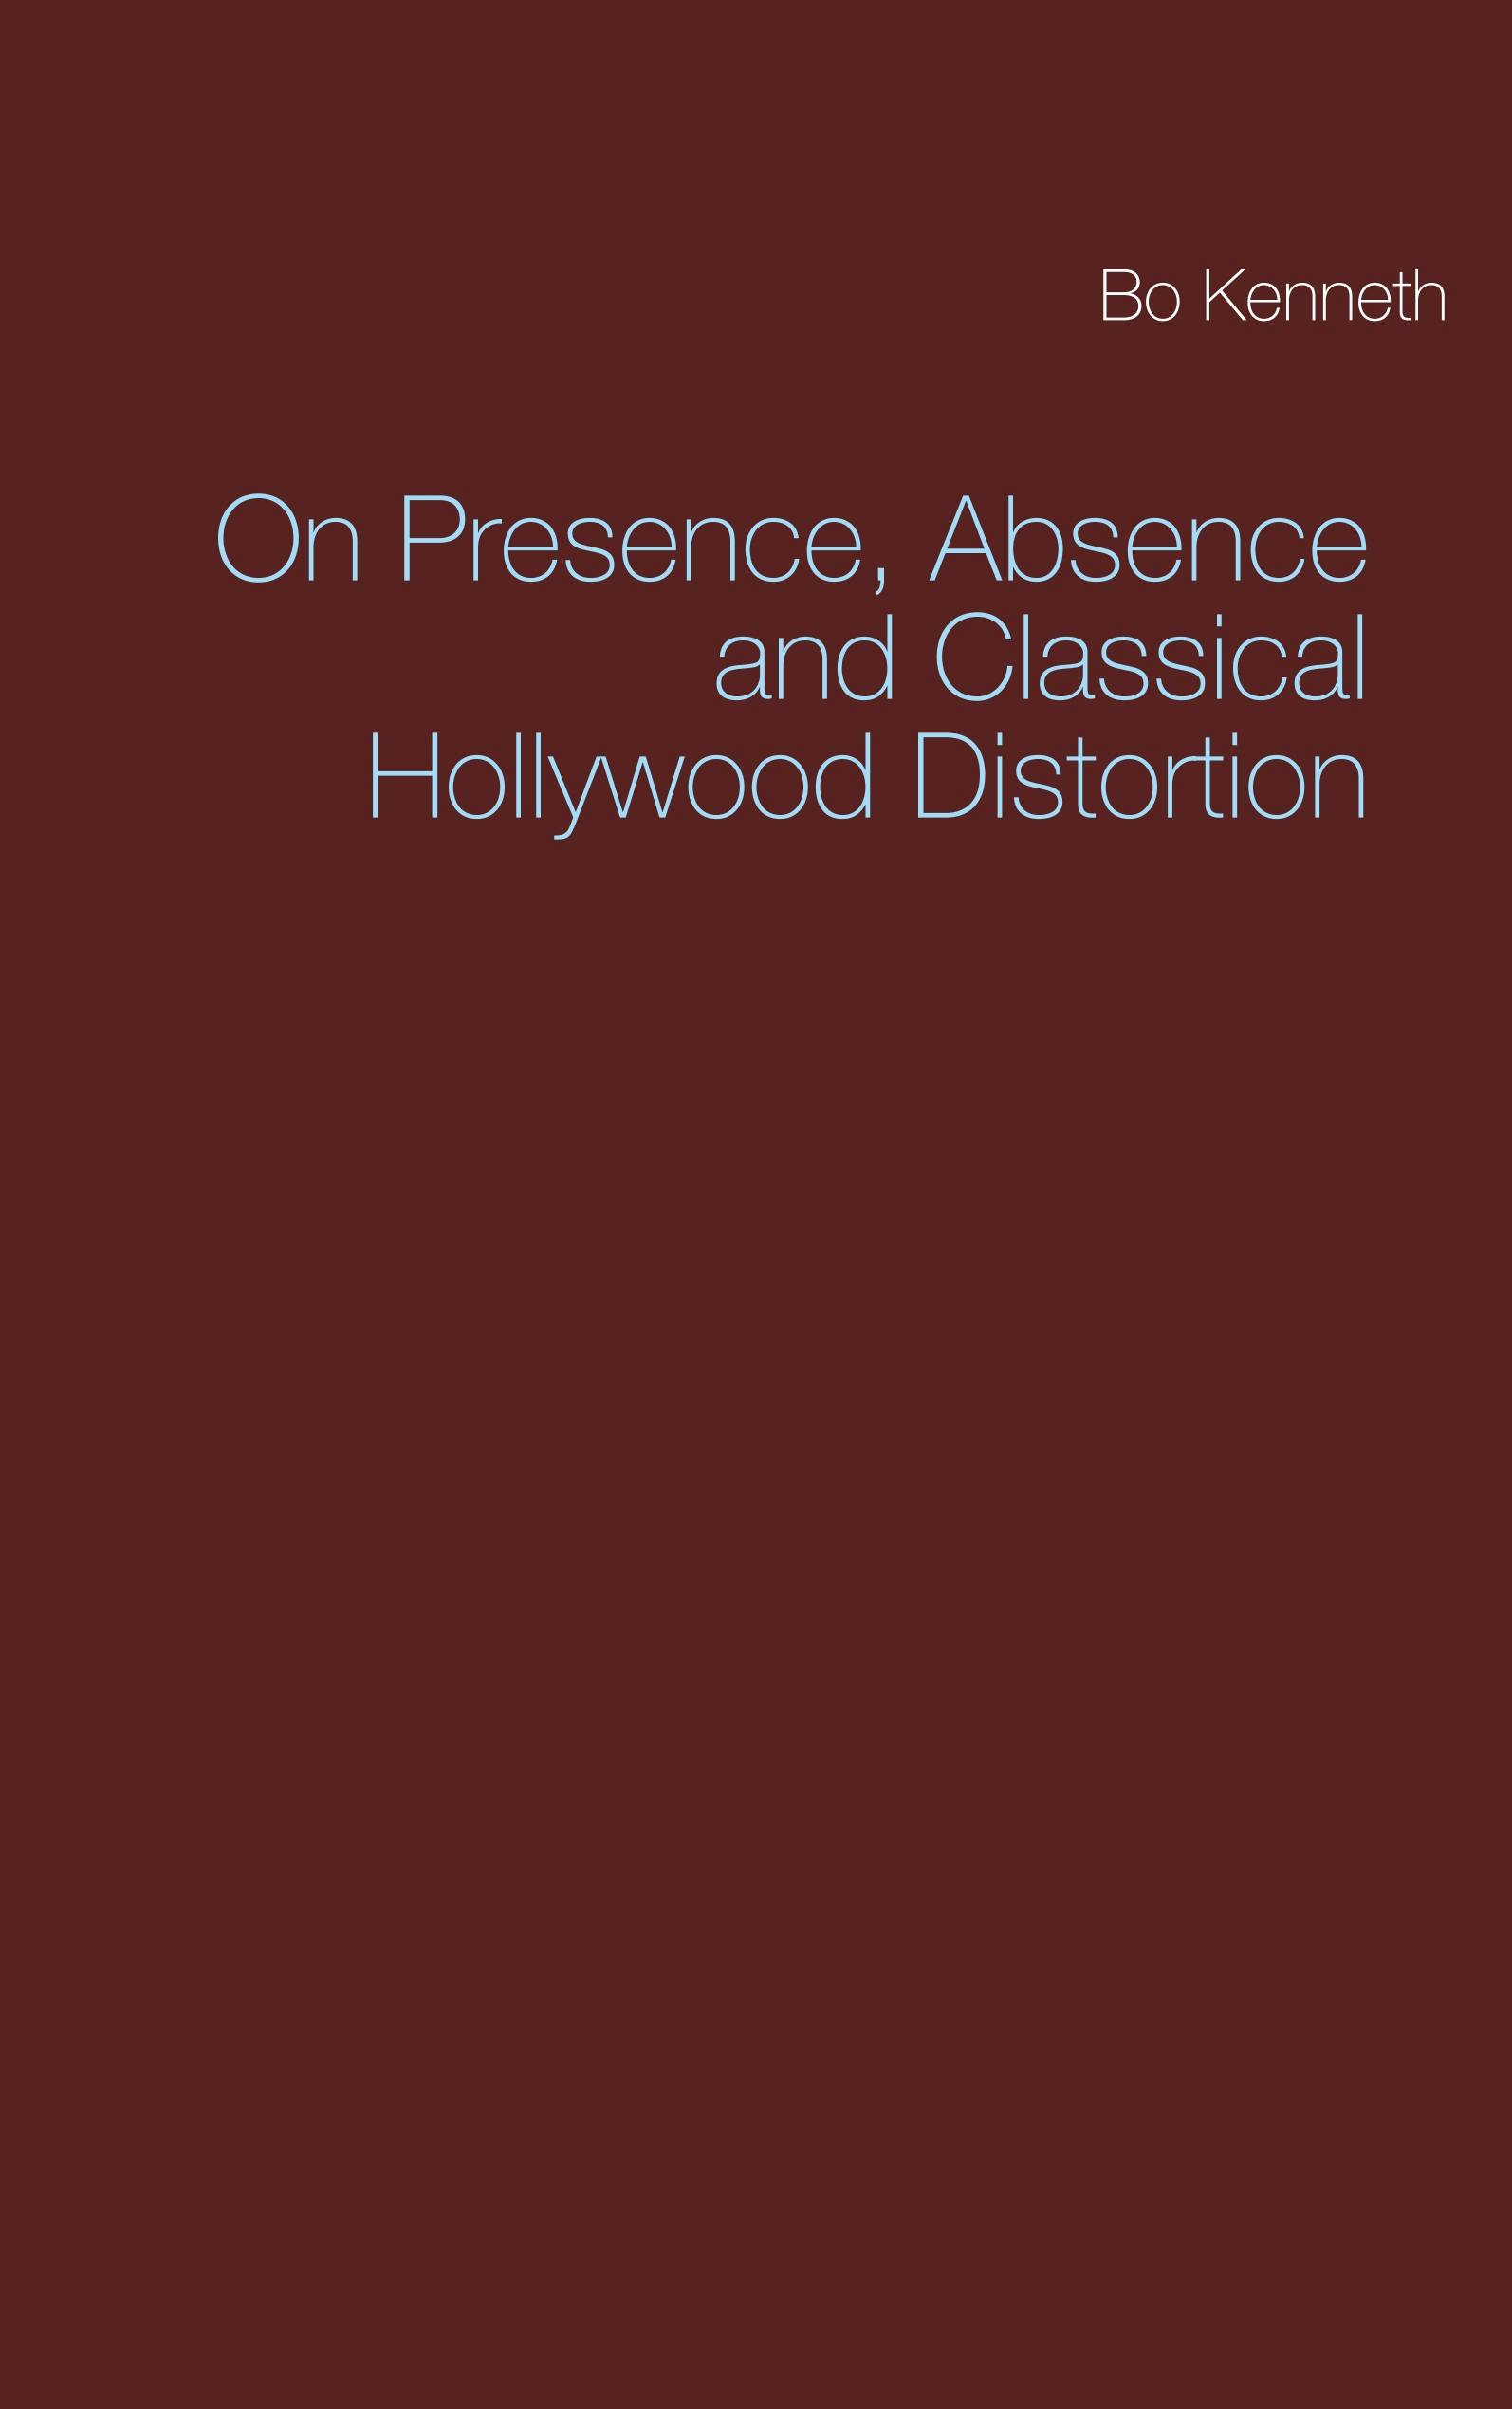 On Presence, Absence and Classical Hollywood Distortion - undefined